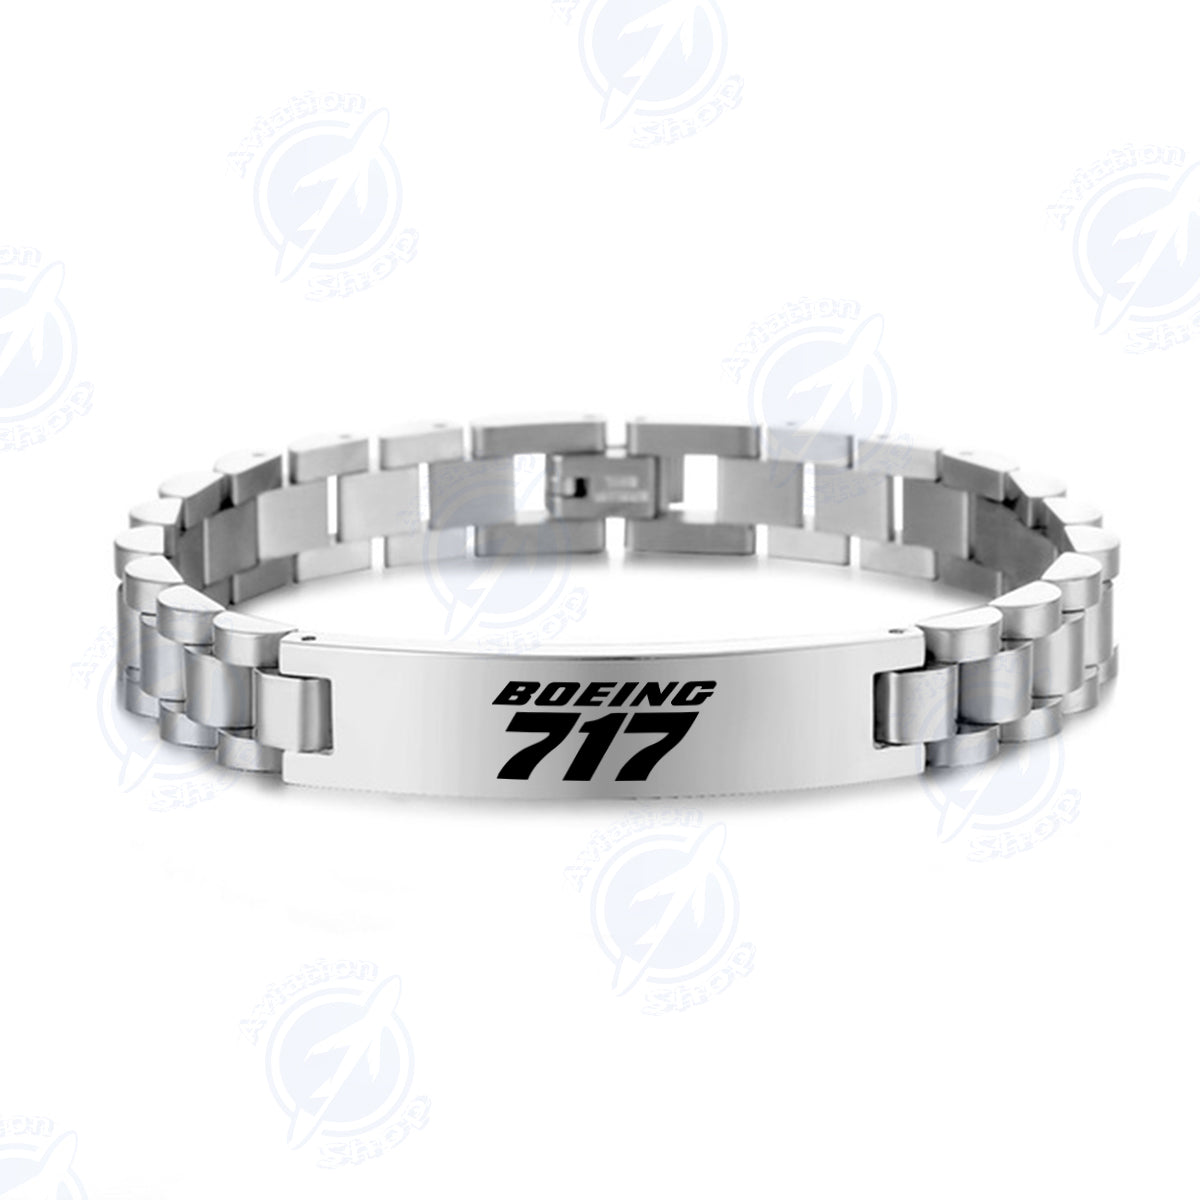 Boeing 717 & Text Designed Stainless Steel Chain Bracelets